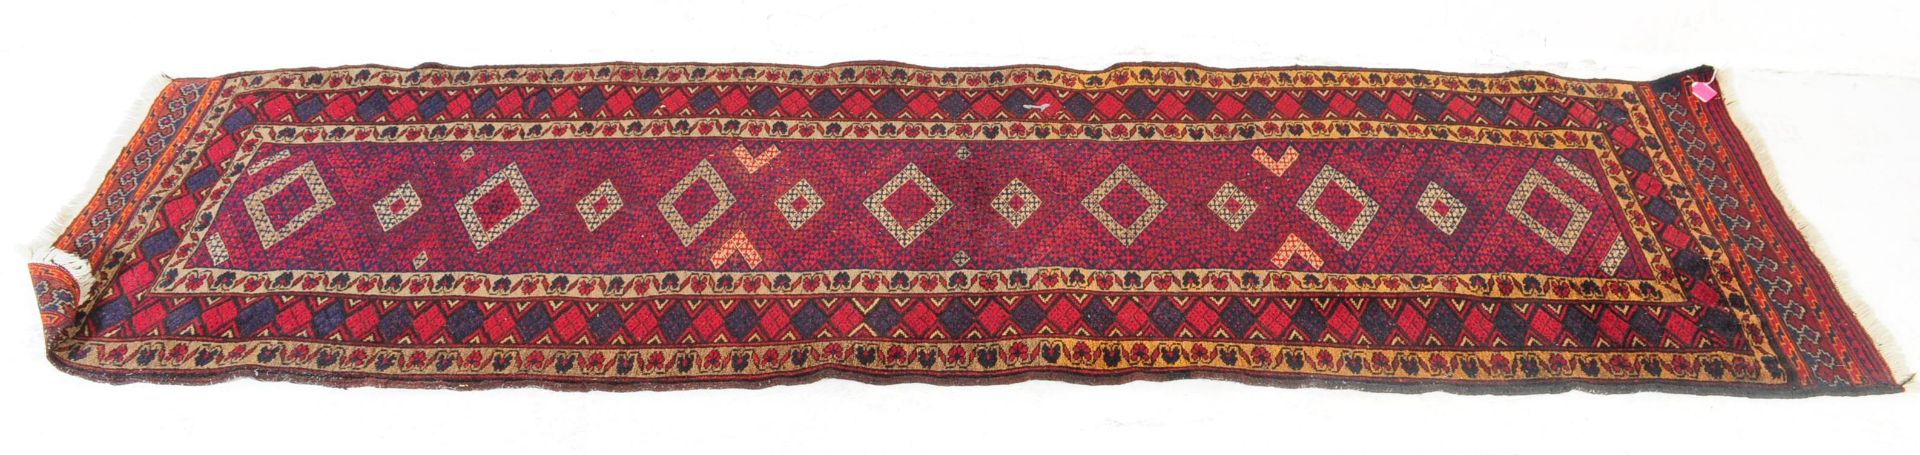 COLLECTION OF MID 20TH CENTURY PRAYER RUGS & RUNNER - Image 2 of 11